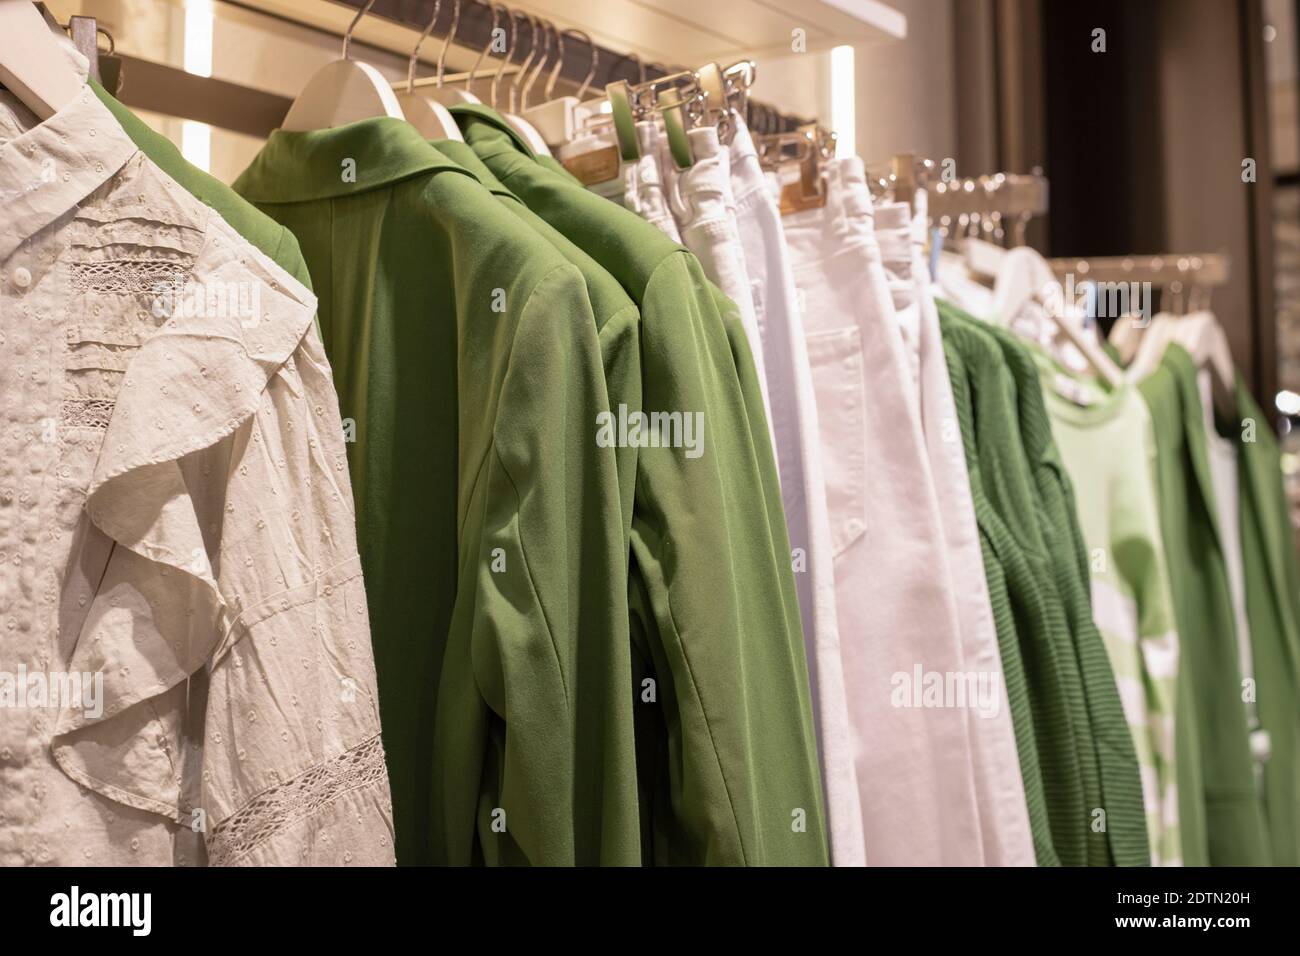 Women clothing collection on hangers in the store. the concept of conscious consumption and recycling of things. Stock Photo